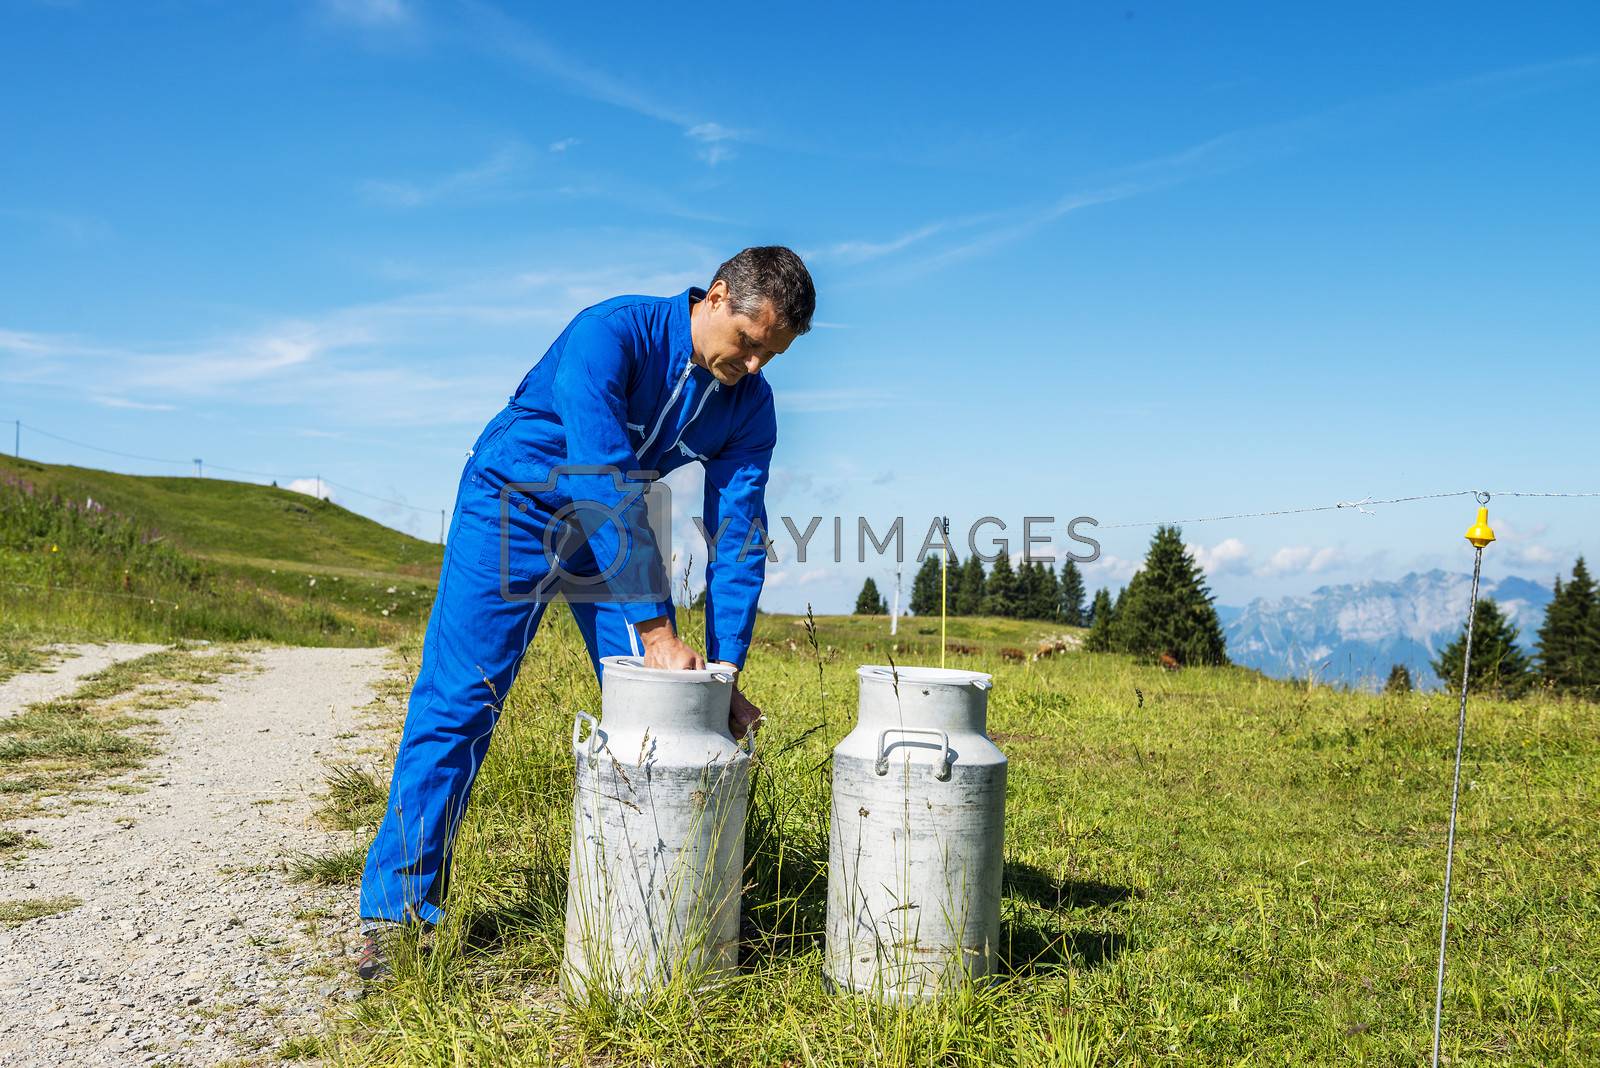 Royalty free image of farmer with milk containers by ventdusud